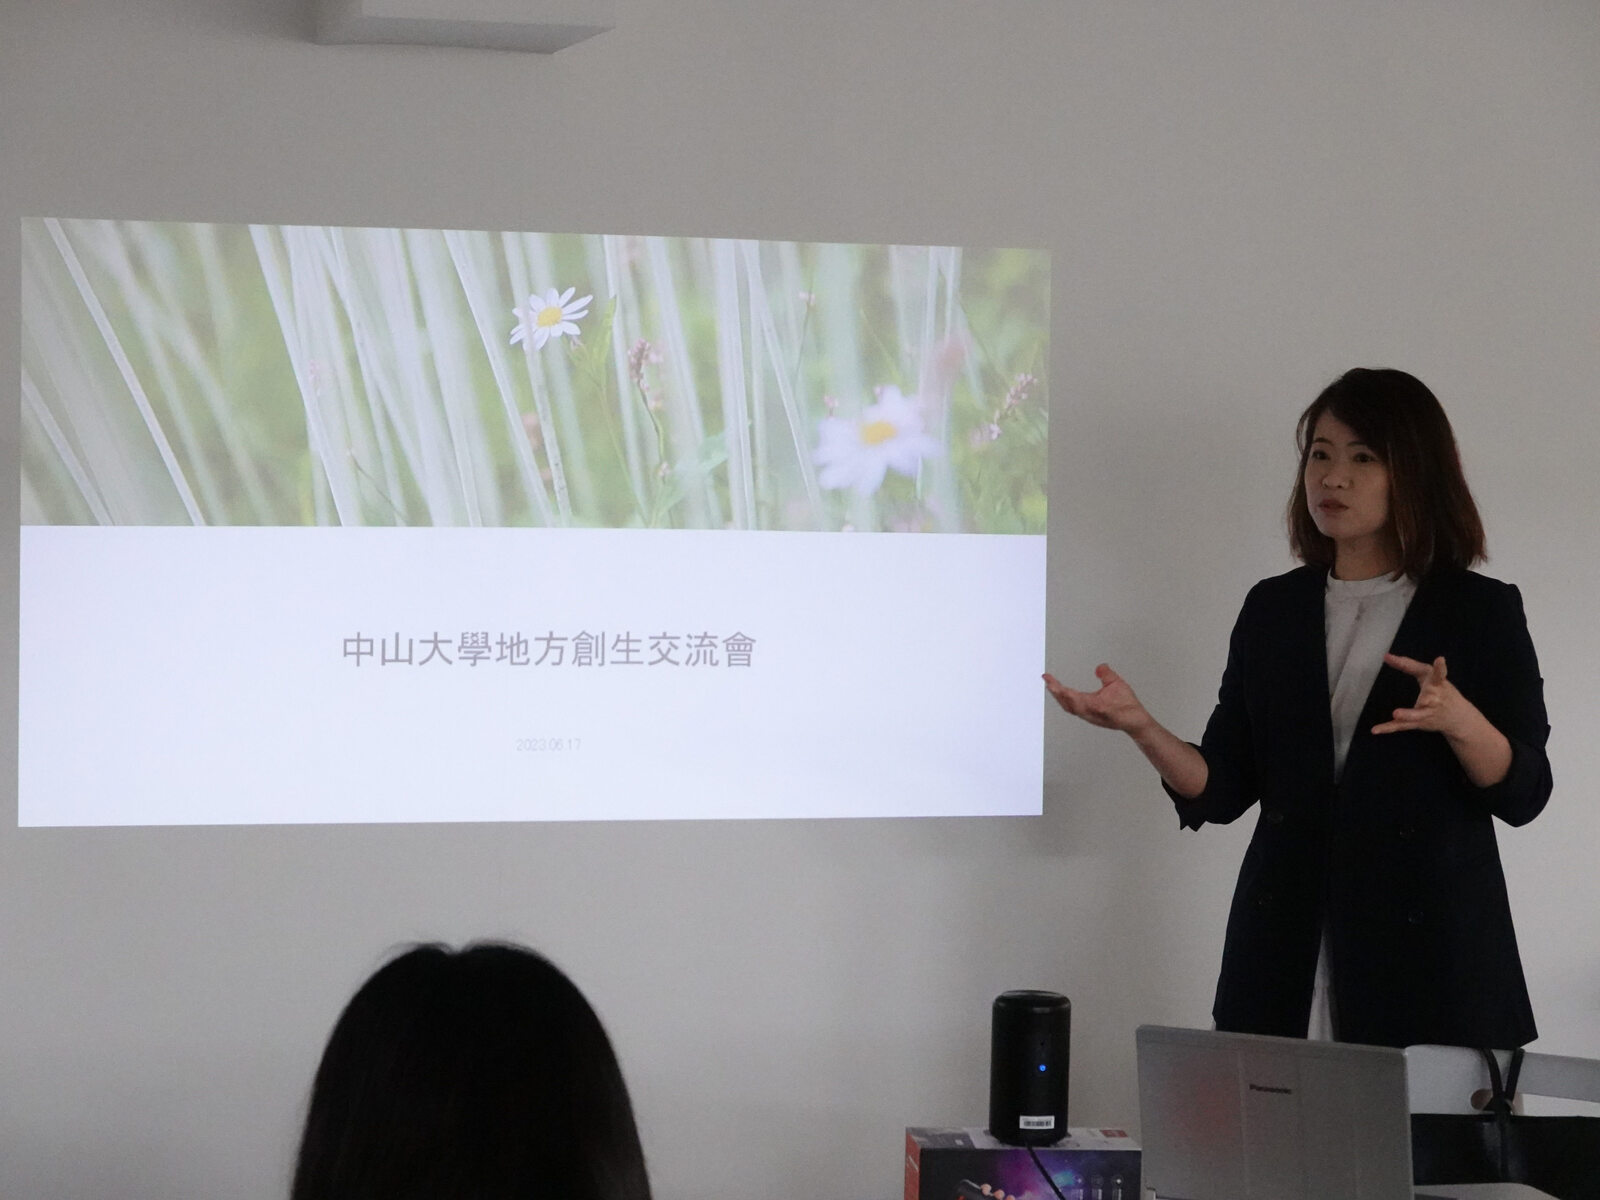 Chiu-Hua Tsou, working in Fram Kitagawa’s office, presented the process of art administration and planning exhibitions